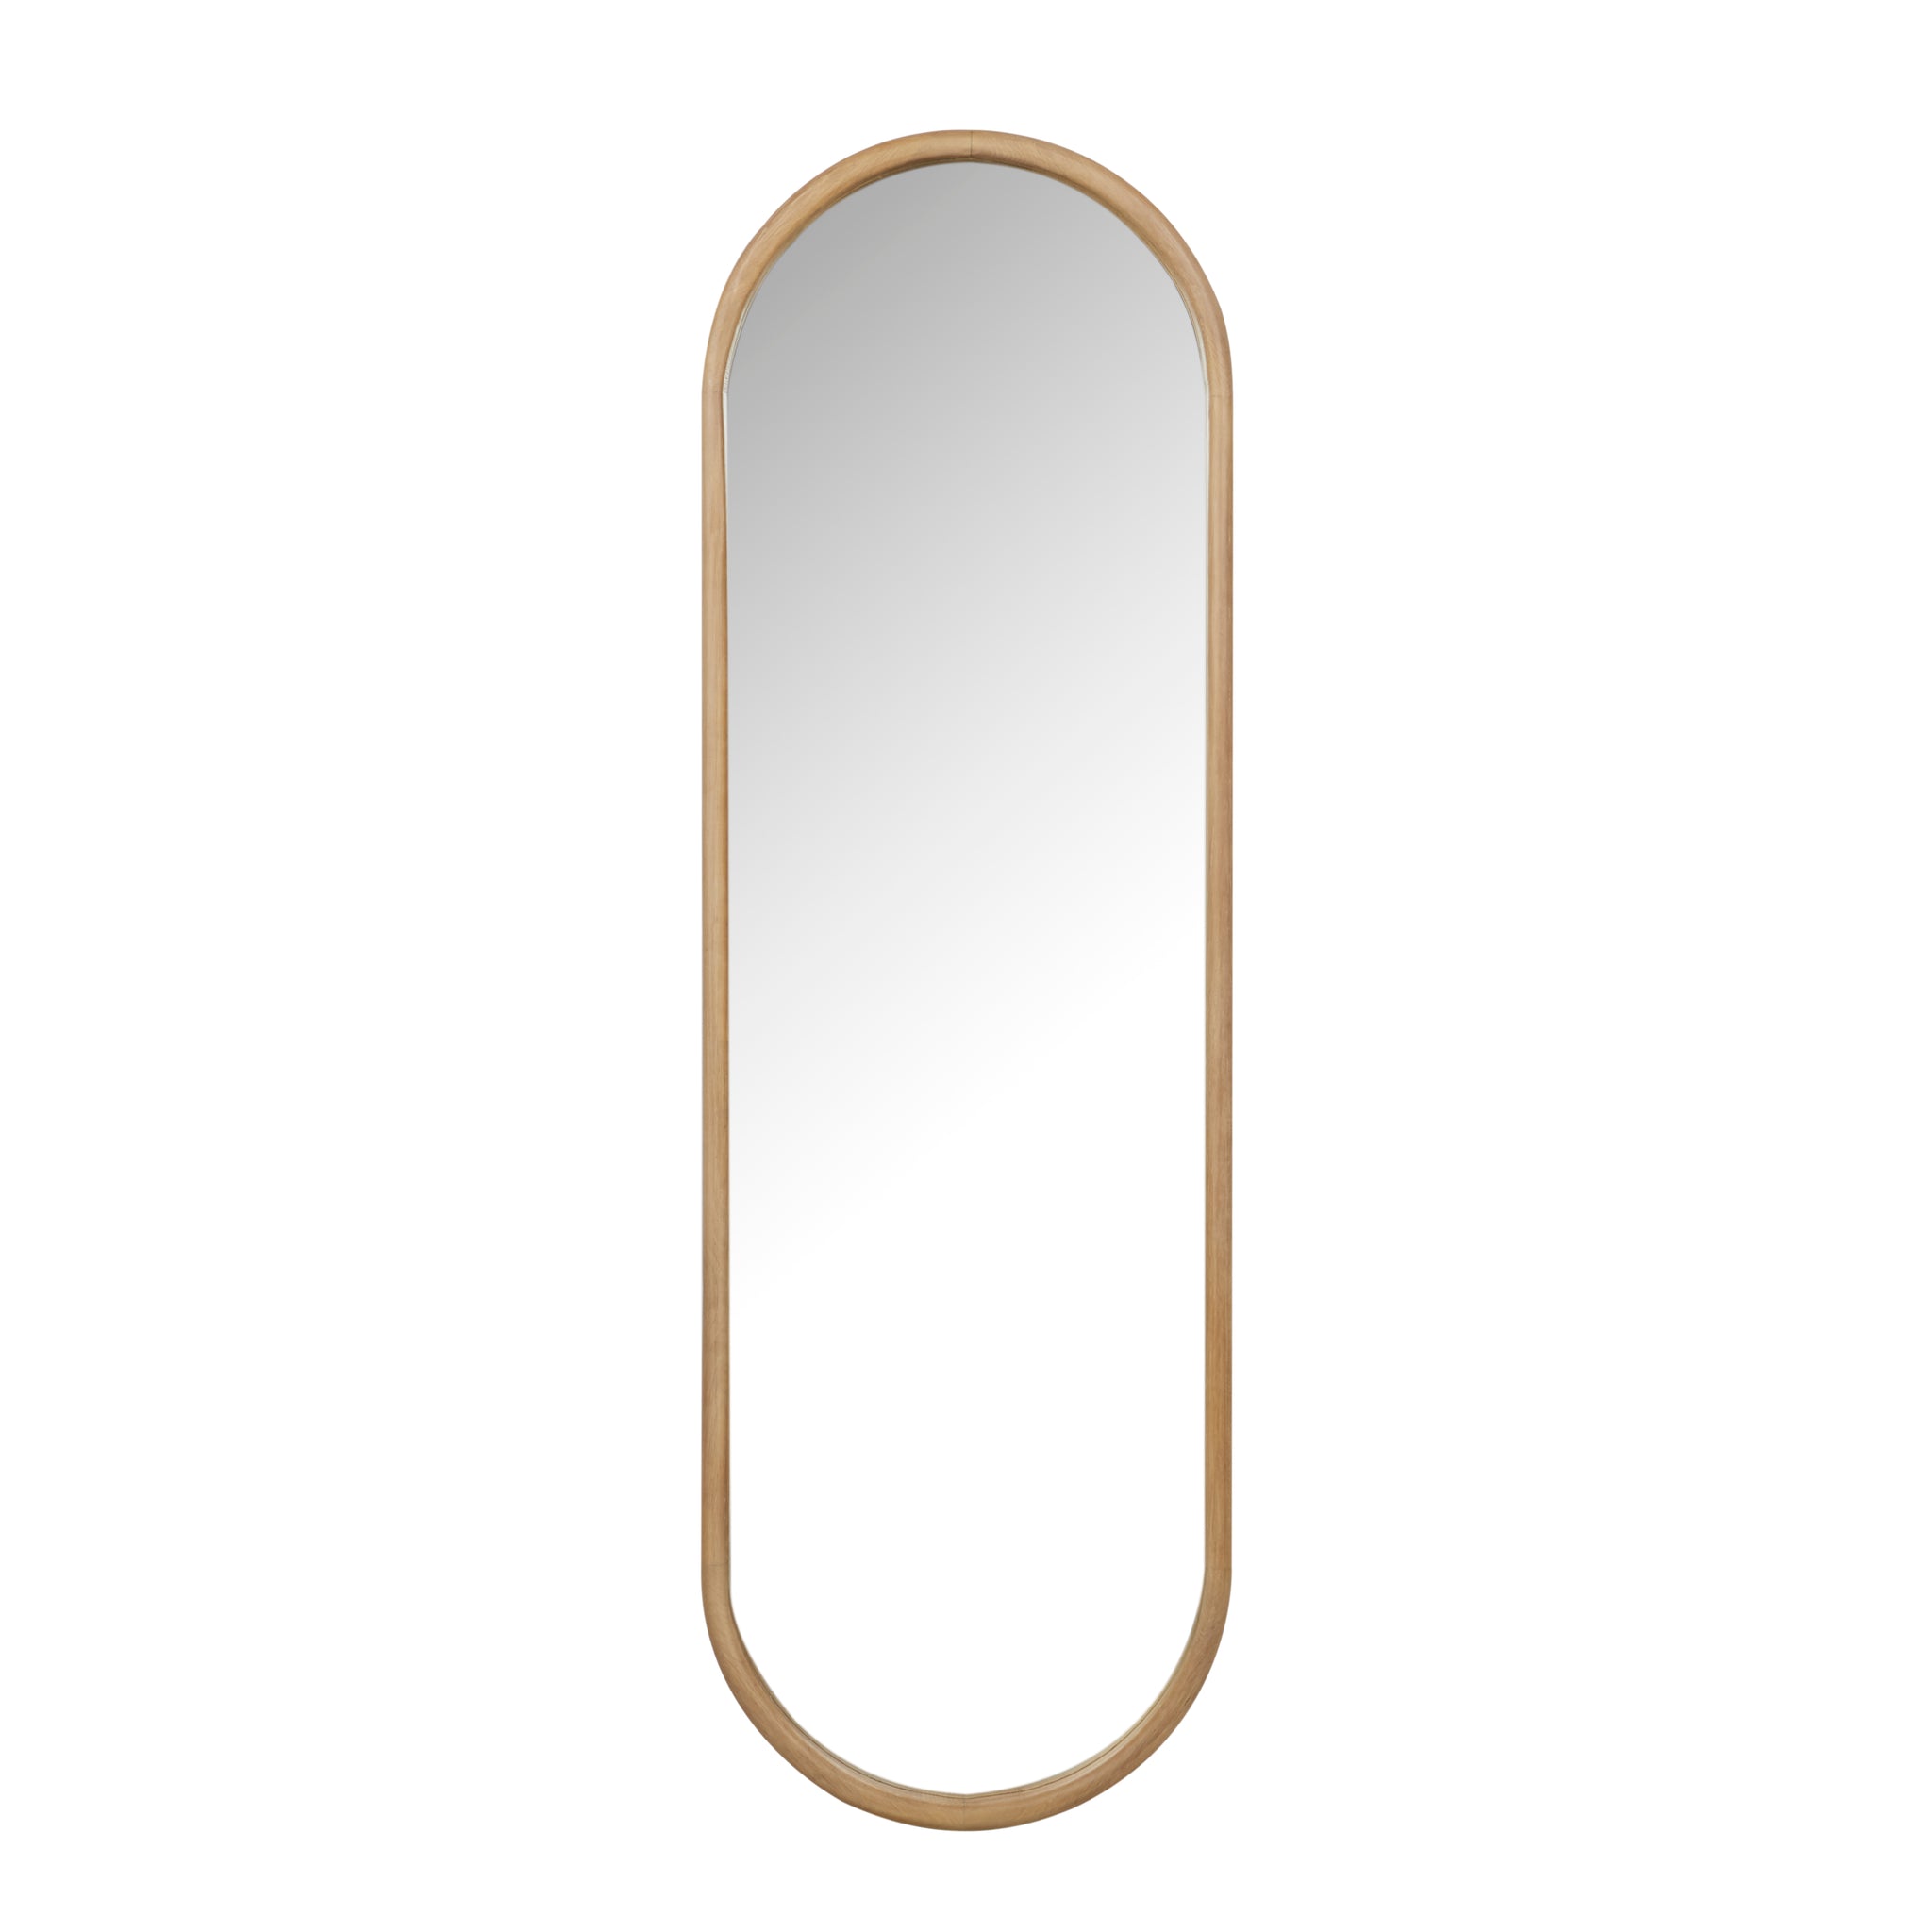 Brody Oval Mirror Natural Oak